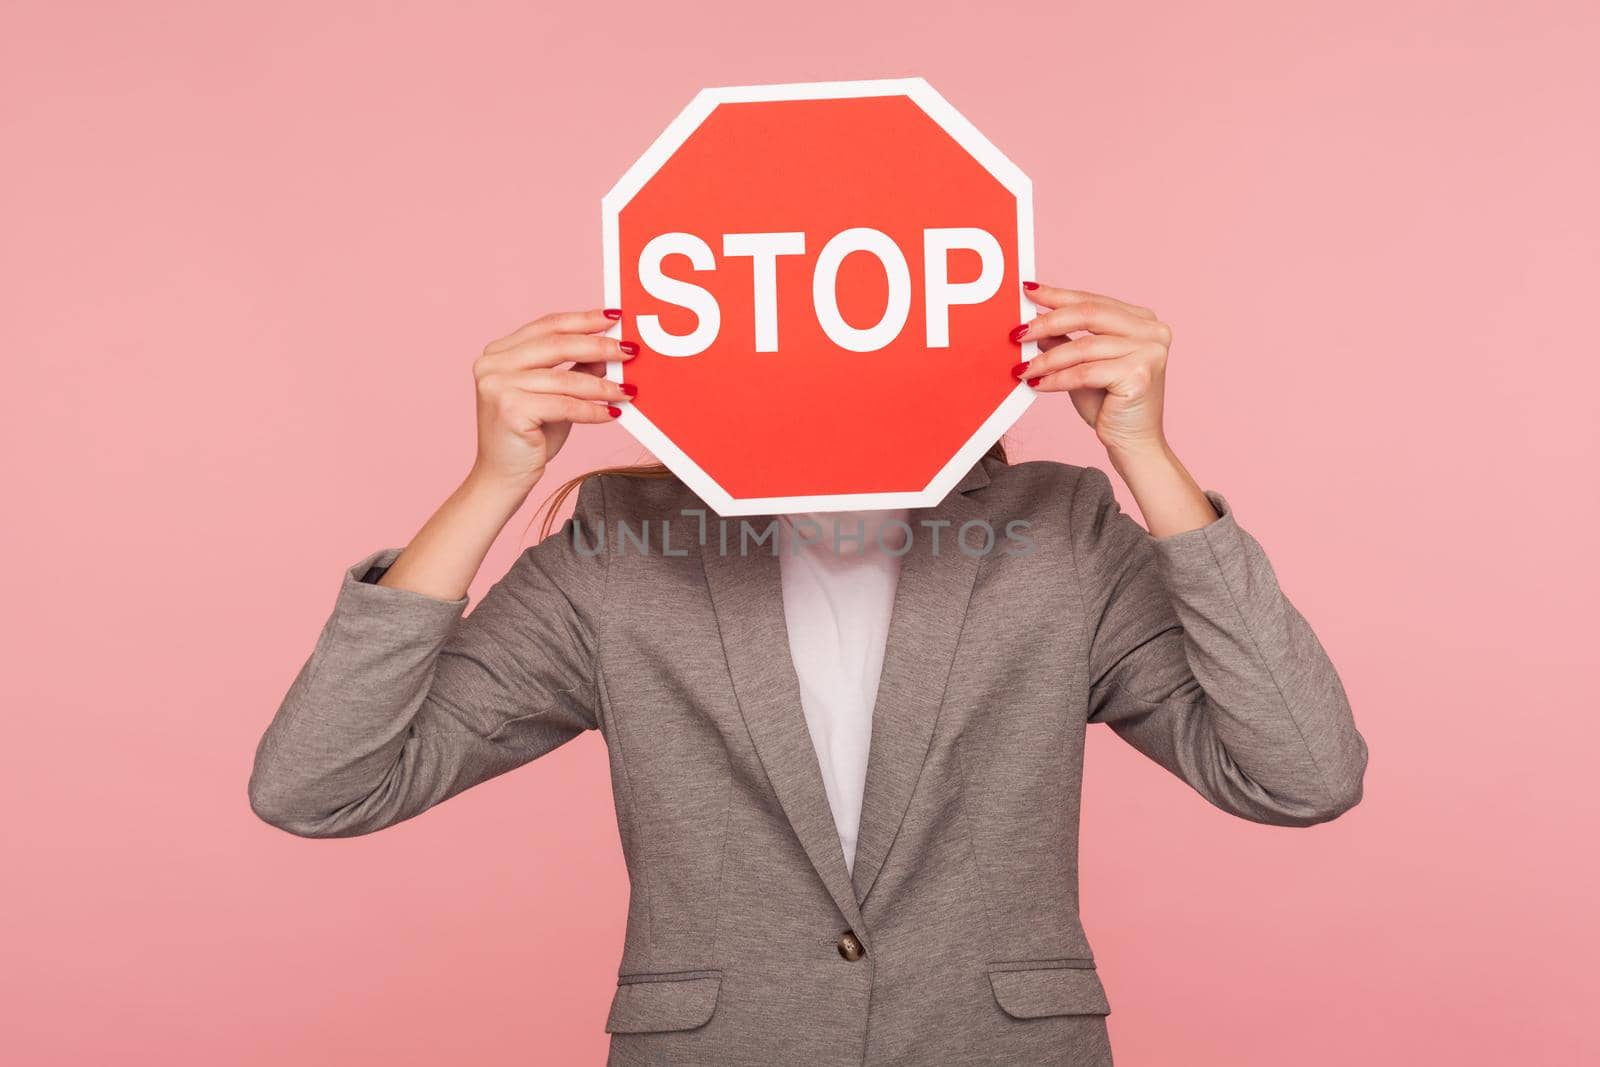 Portrait of unknown business person in suit jacket covering face with Stop symbol, anonymous woman holding red traffic sign stop, warning of danger, restriction and limits. indoor studio shot isolated